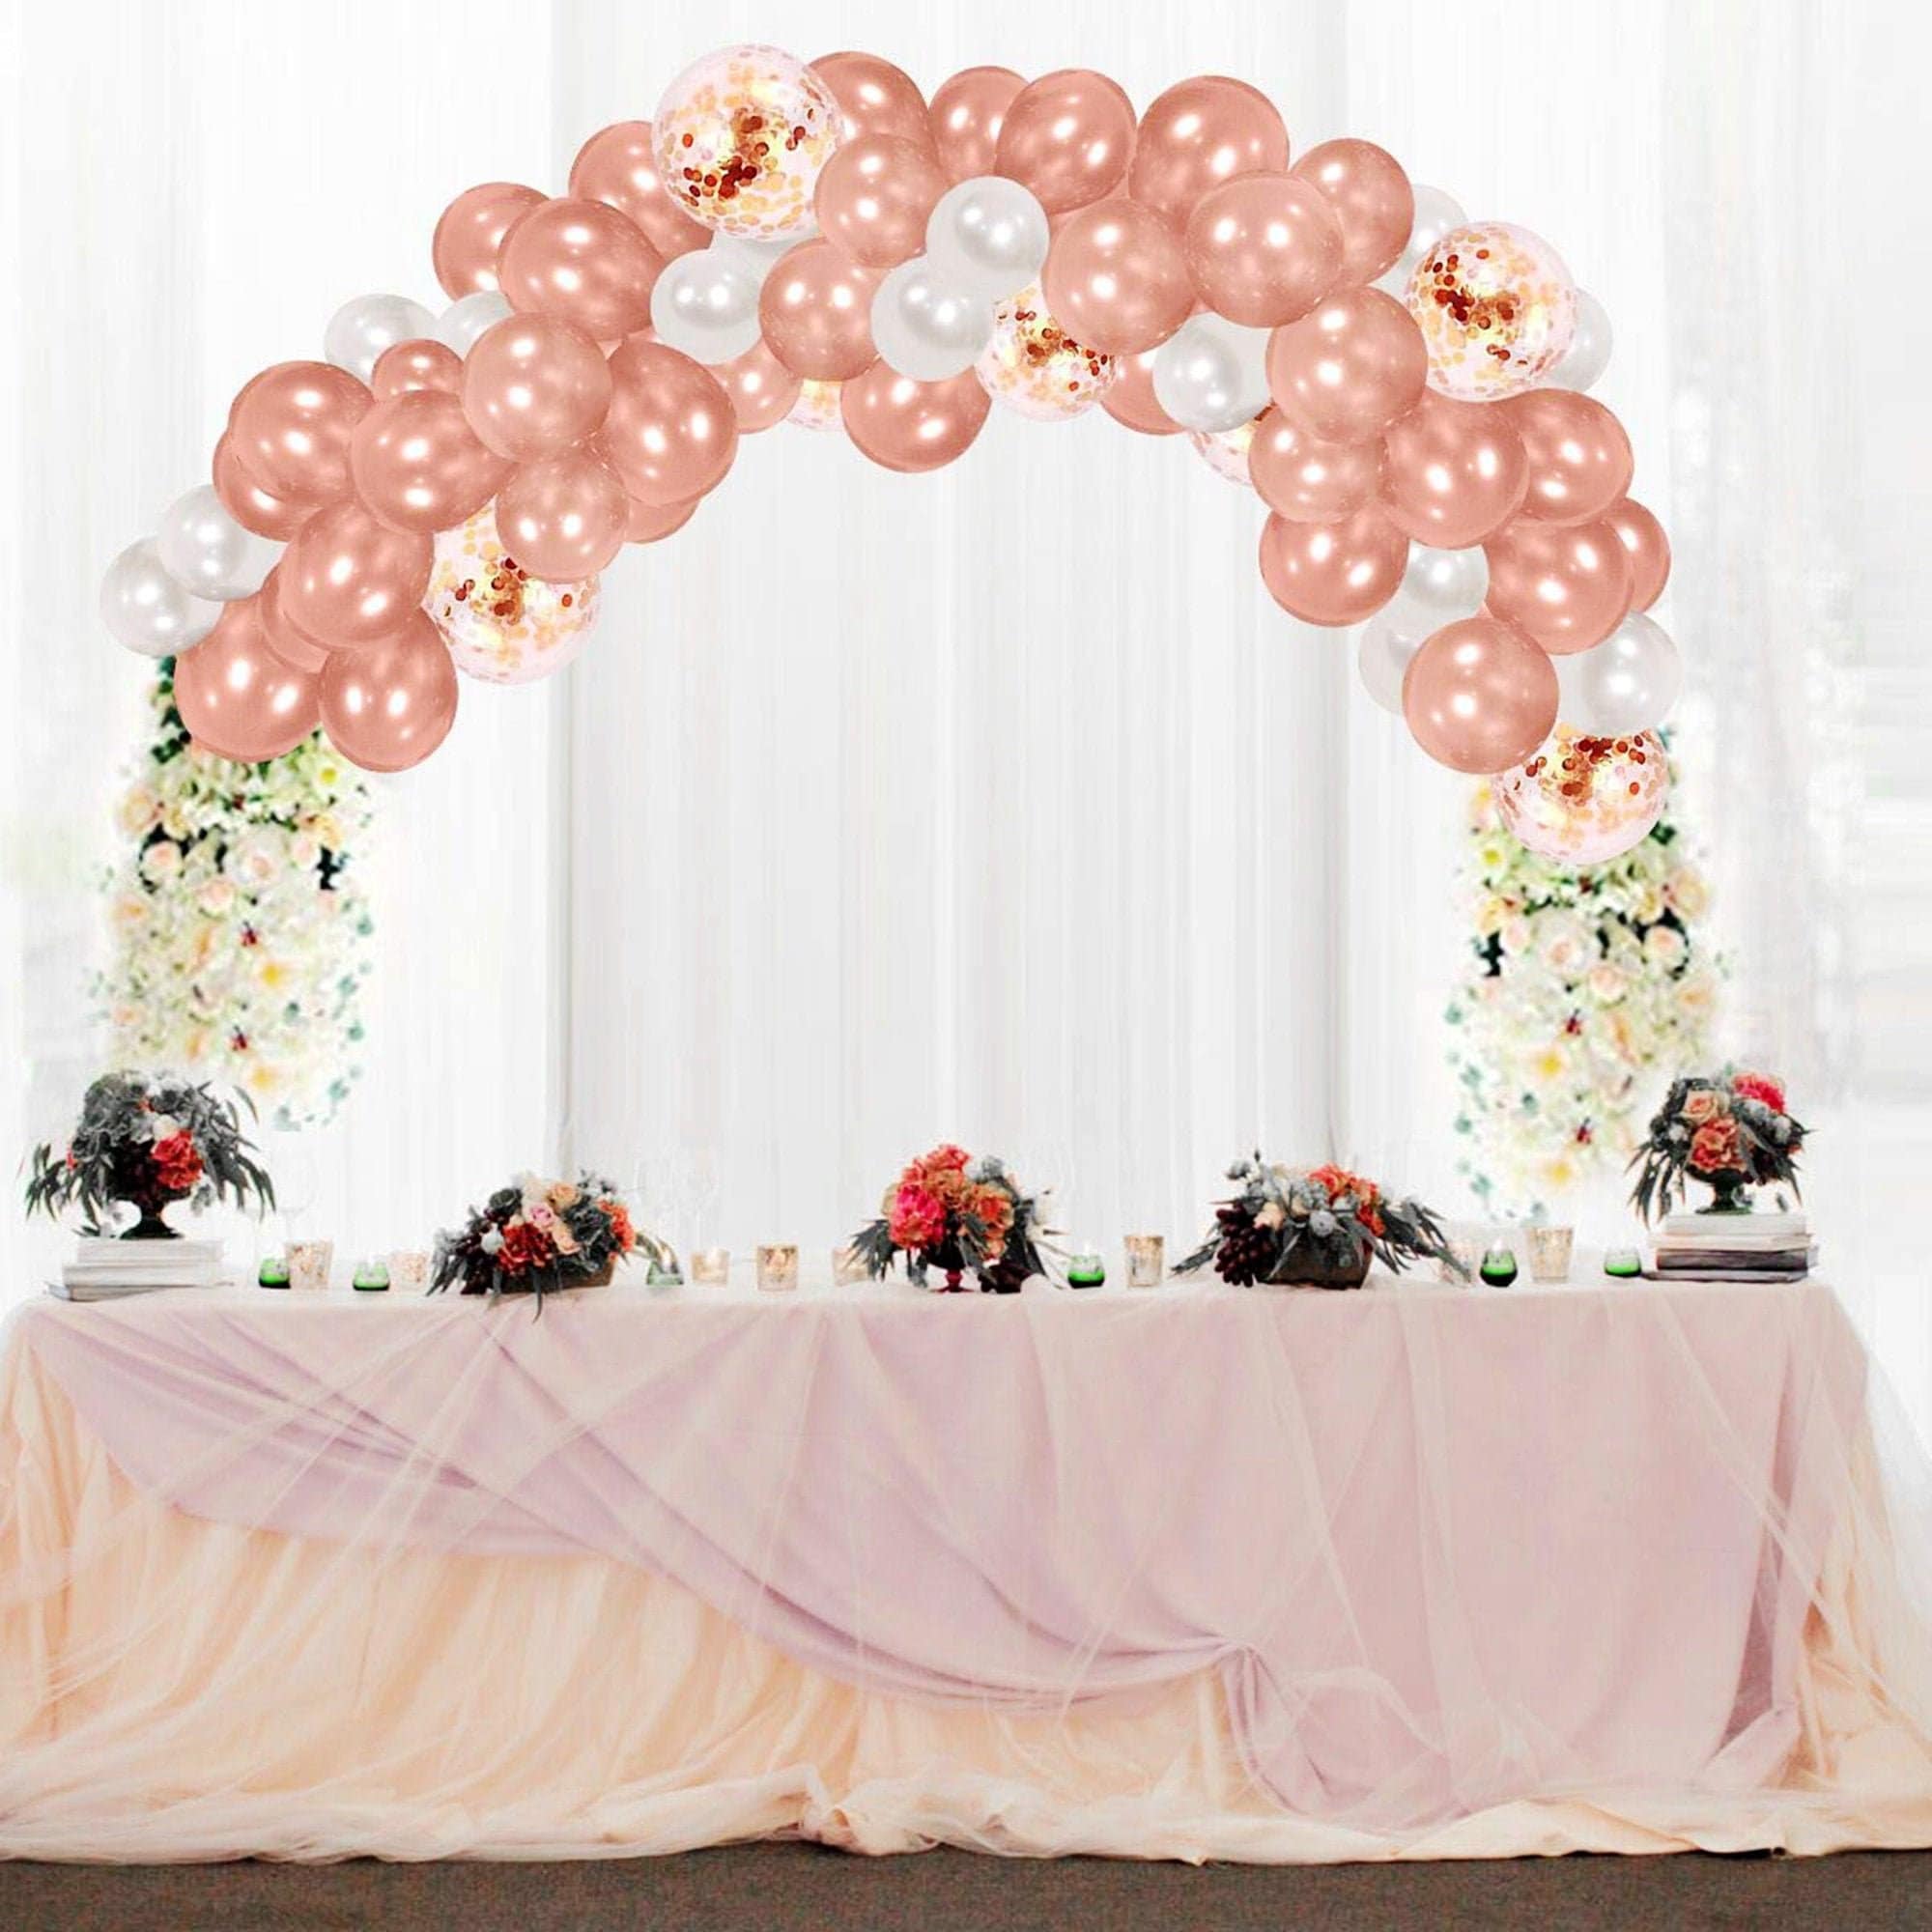 Rose Gold Balloon Garland Arch with Confetti balloons for Birthday Party Wedding Decorations